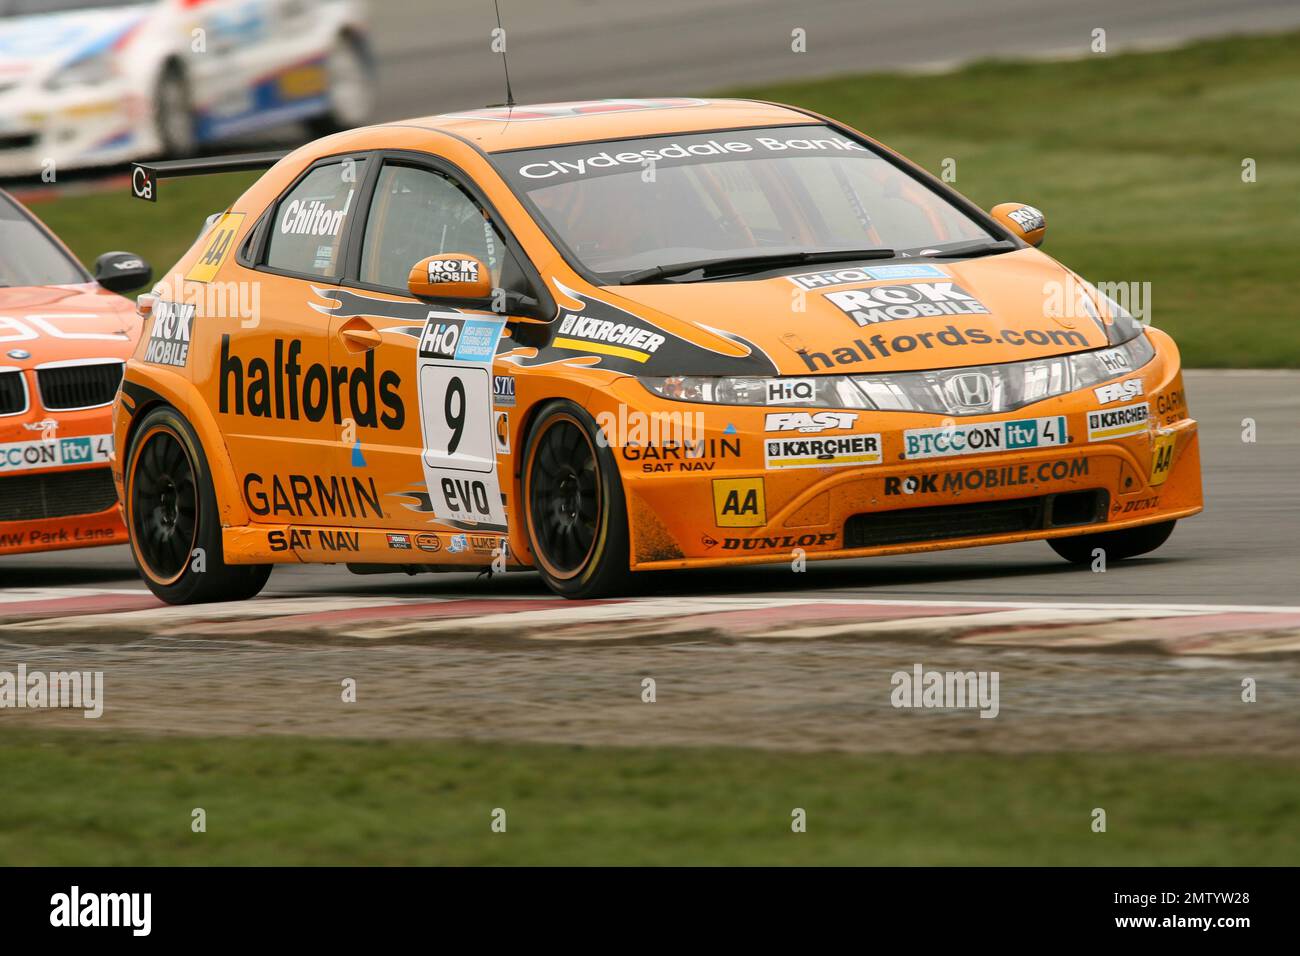 Tom Chilton on track at Brands Hatch driving the Honda Civic during the BTCC 2008 championship race Stock Photo